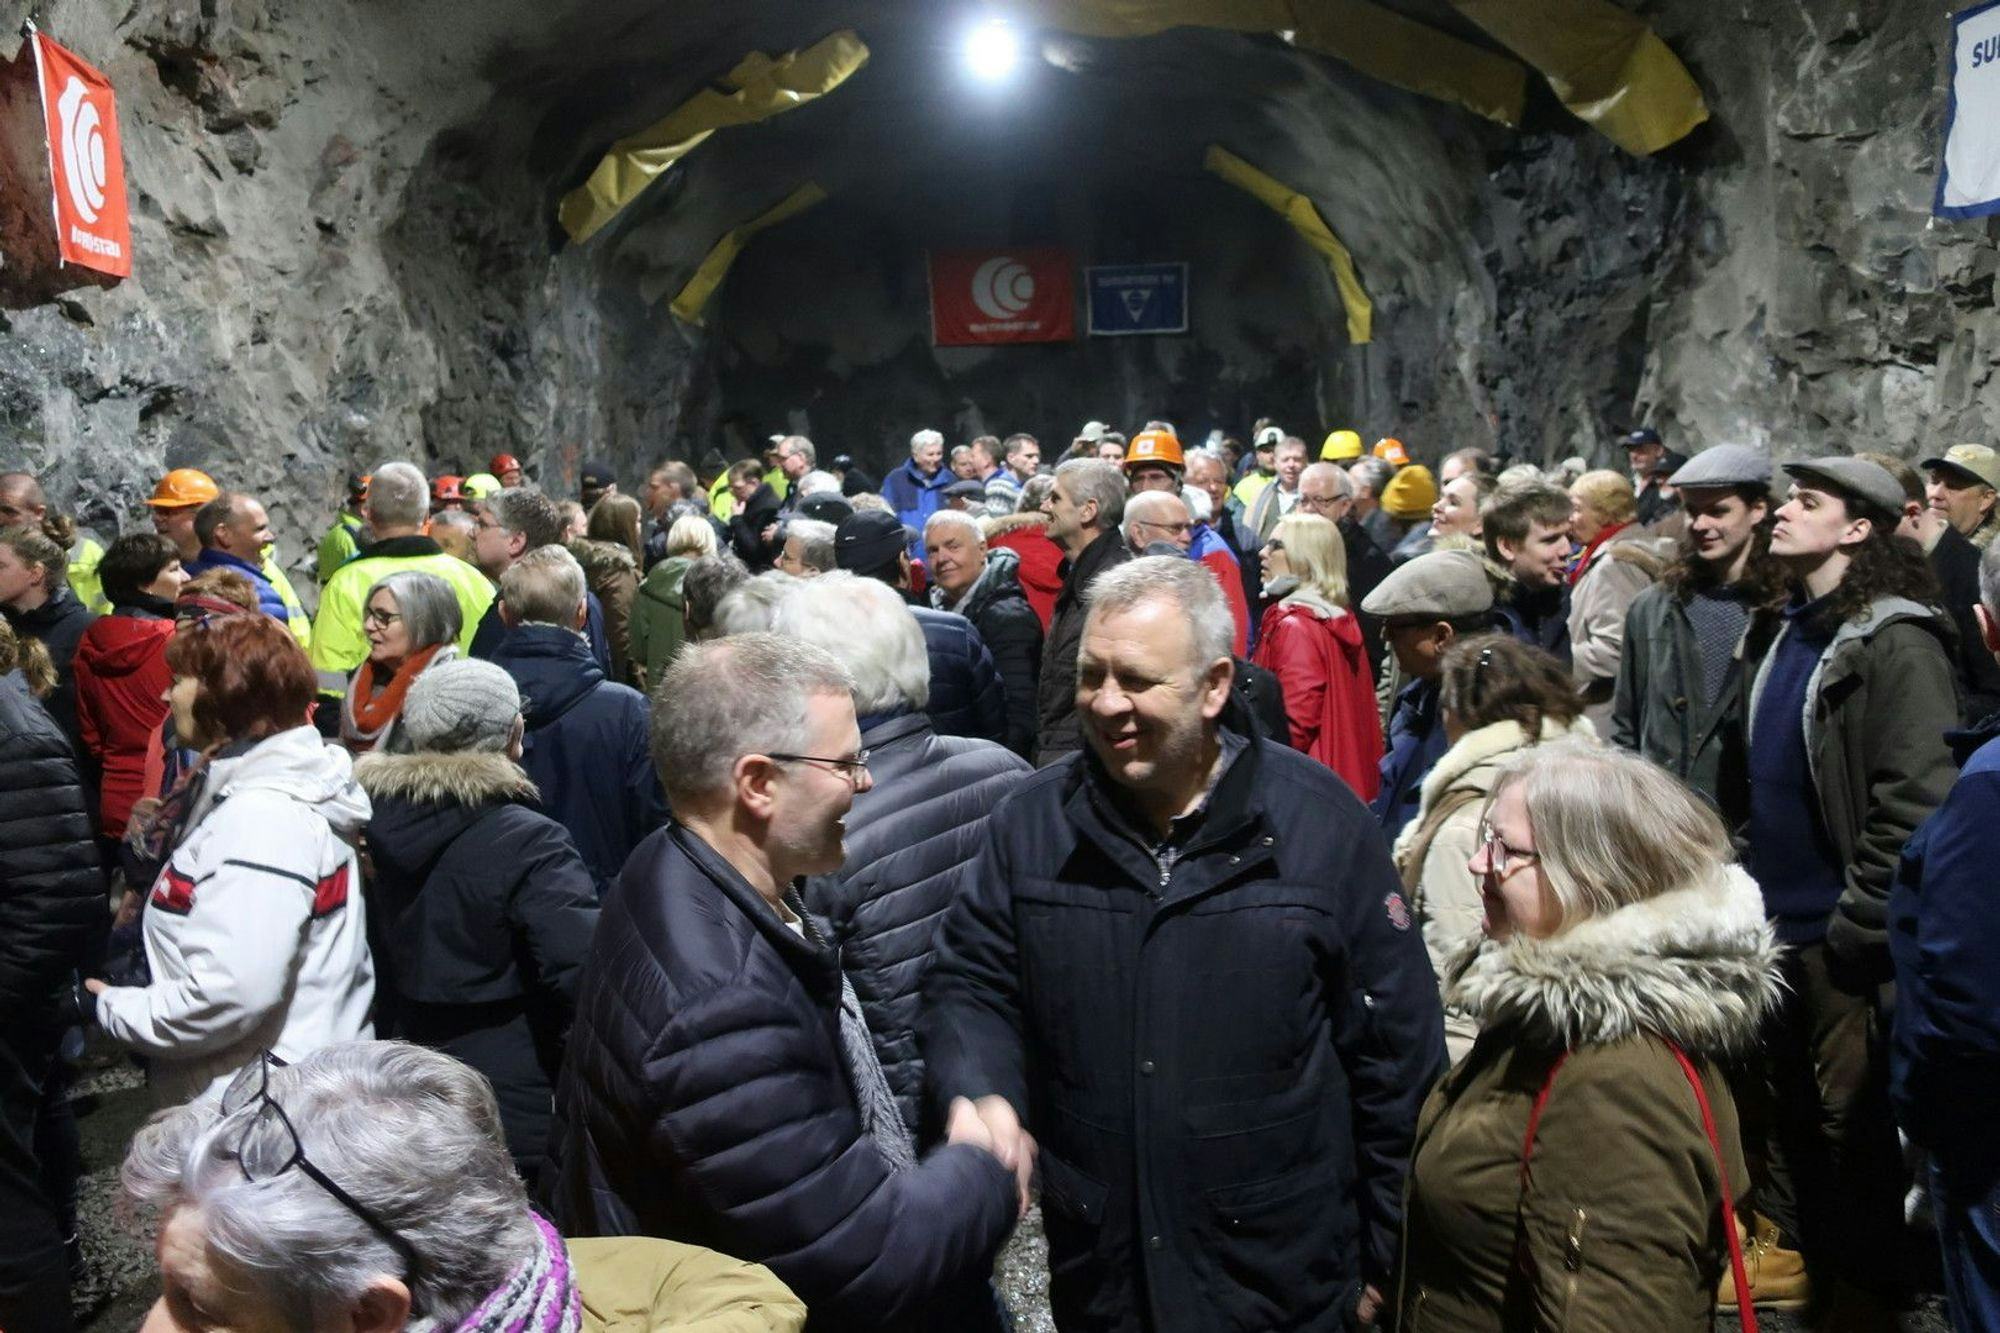 A large group of people gathered inside a tunnel for an event